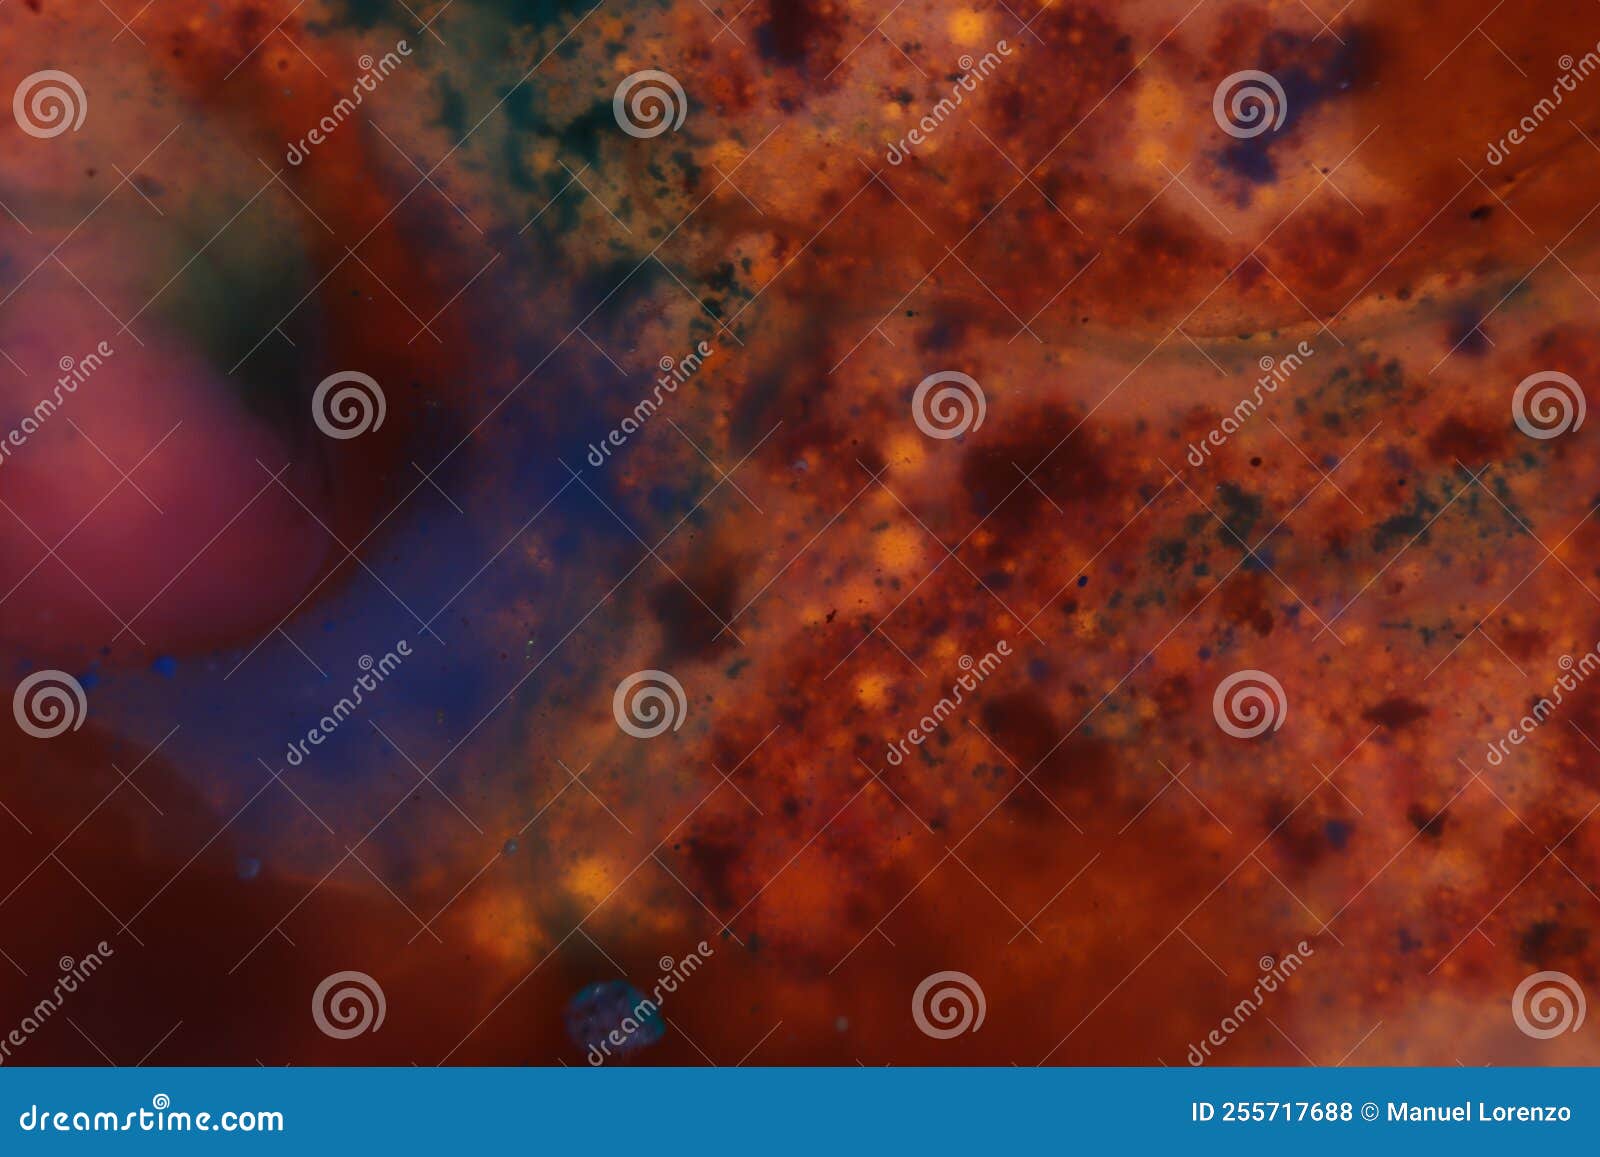 galaxy abstract universe infinite artificial background grandiose different